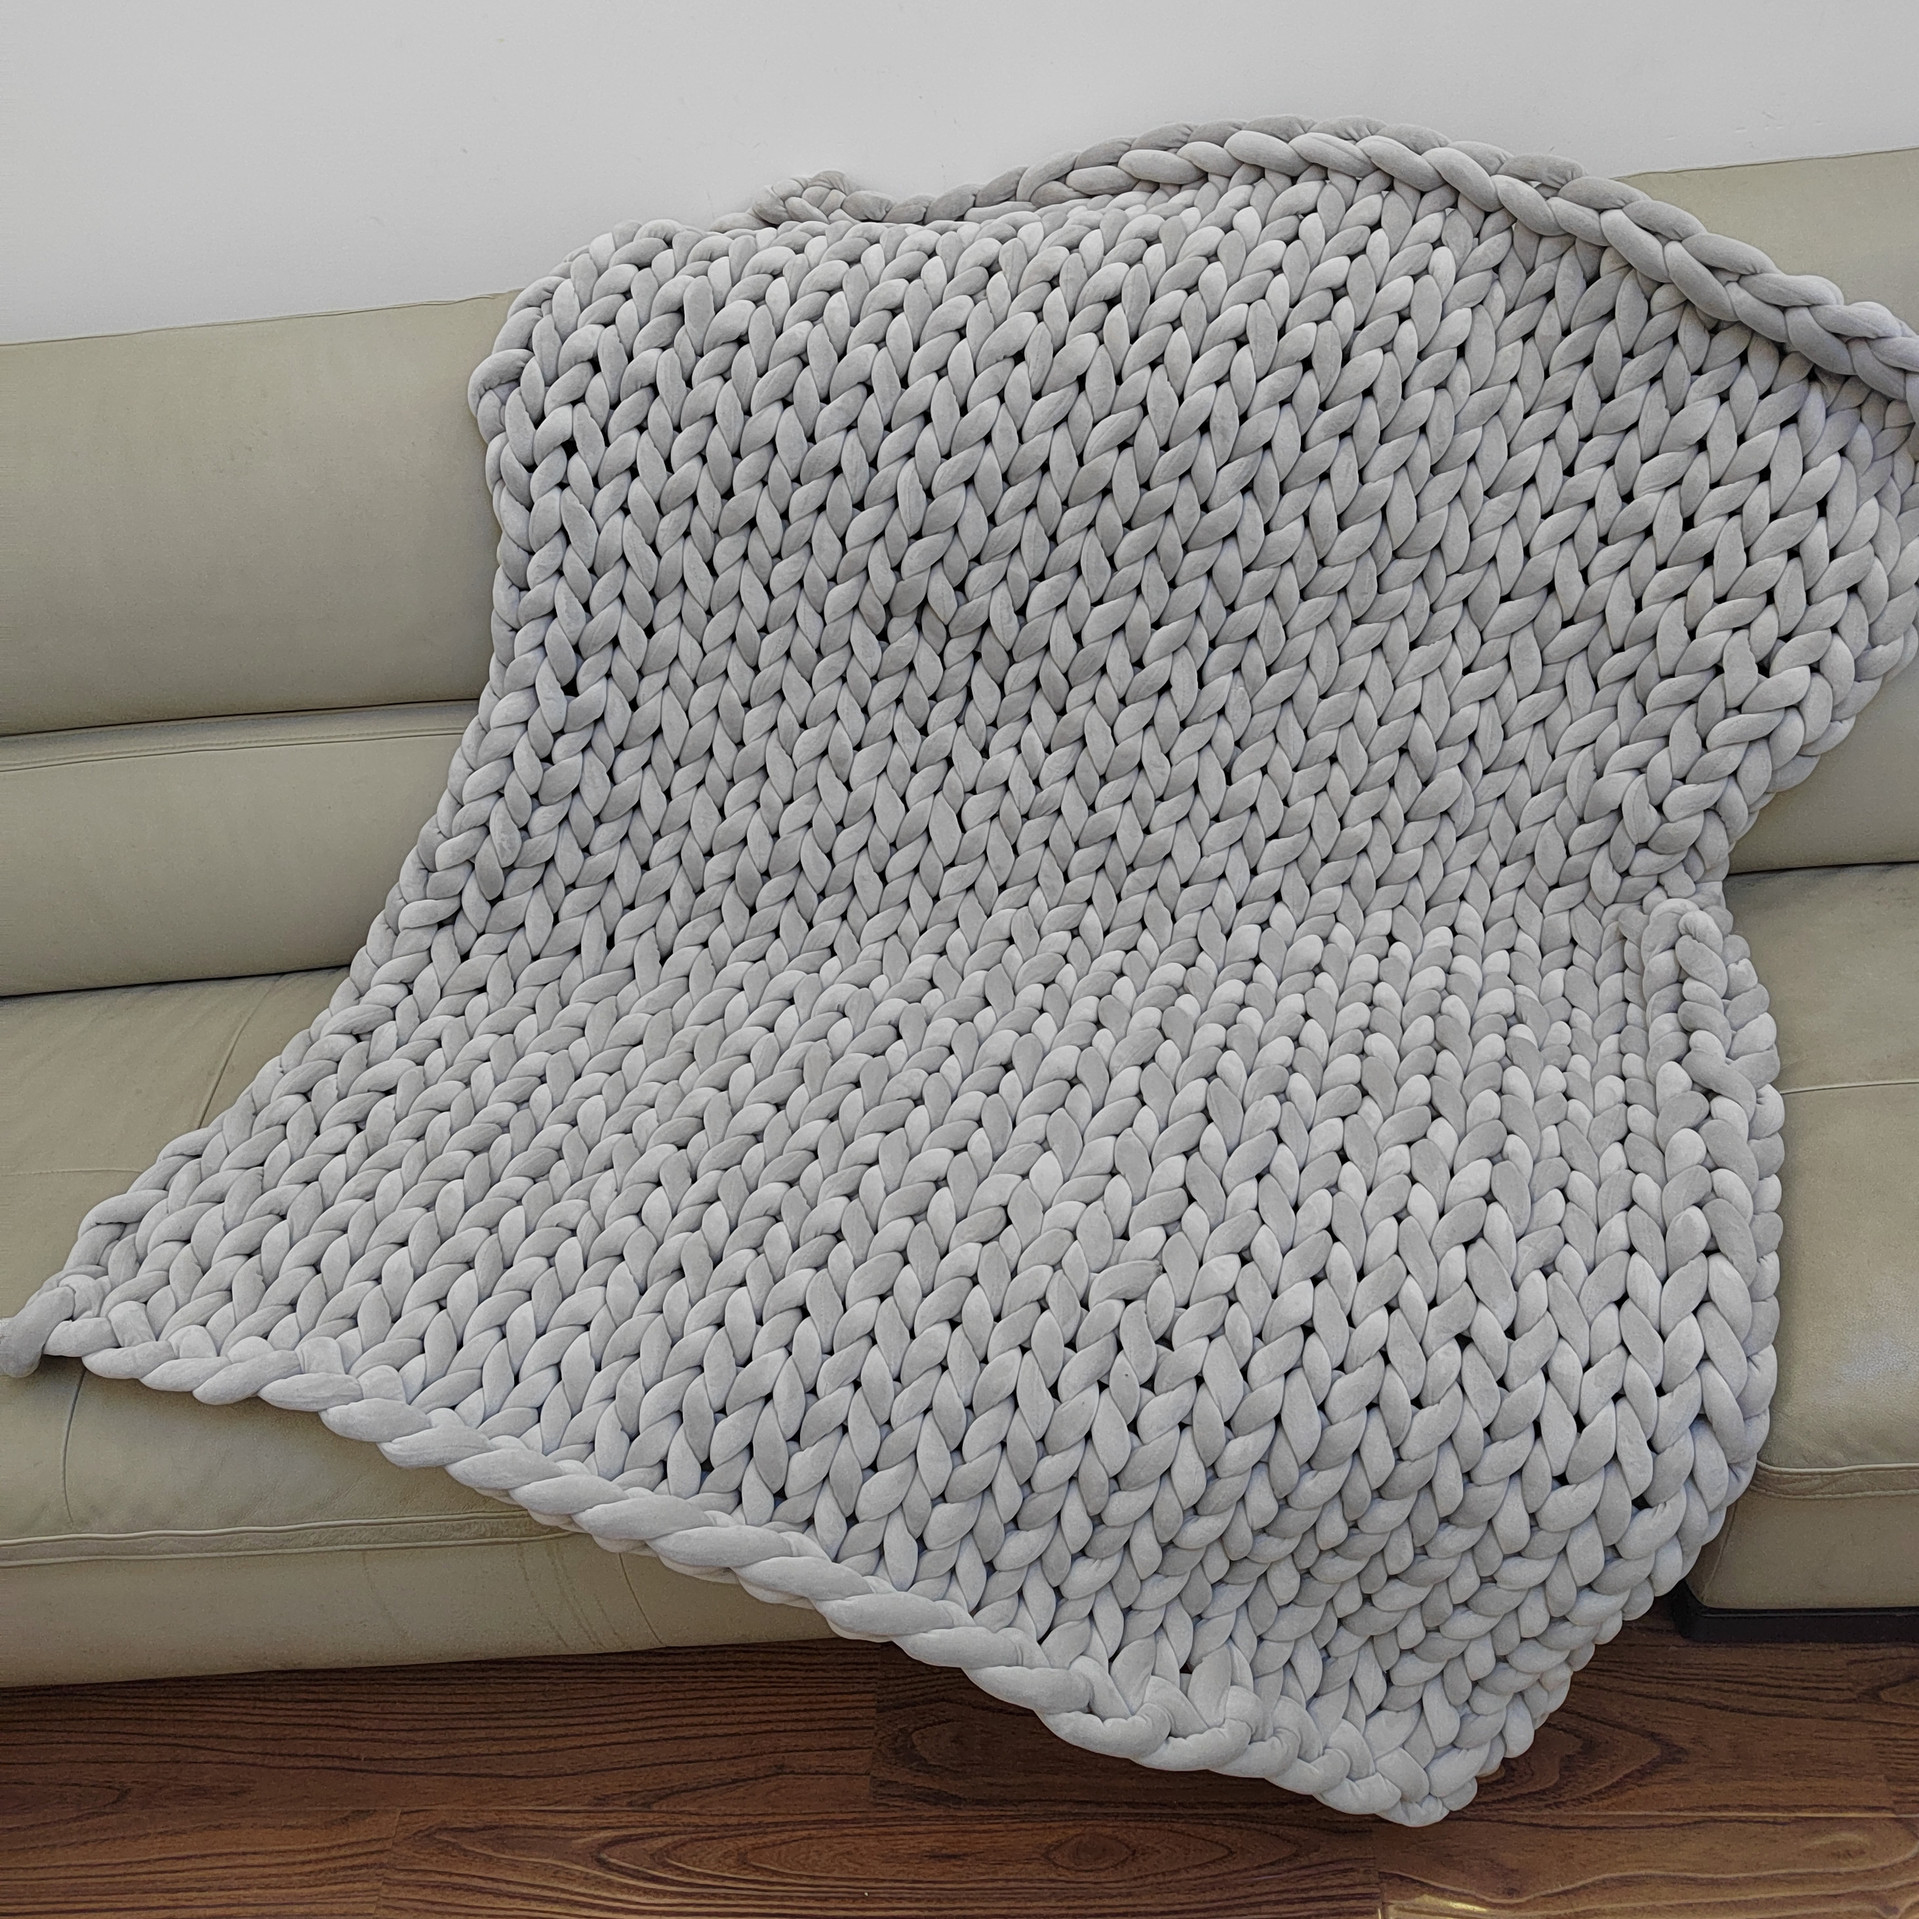 Amazon New Crystal Flannel Blanket Hand-Woven Coarse Yarn Knitted Sofa Cover Blanket Ins Nordic Wish